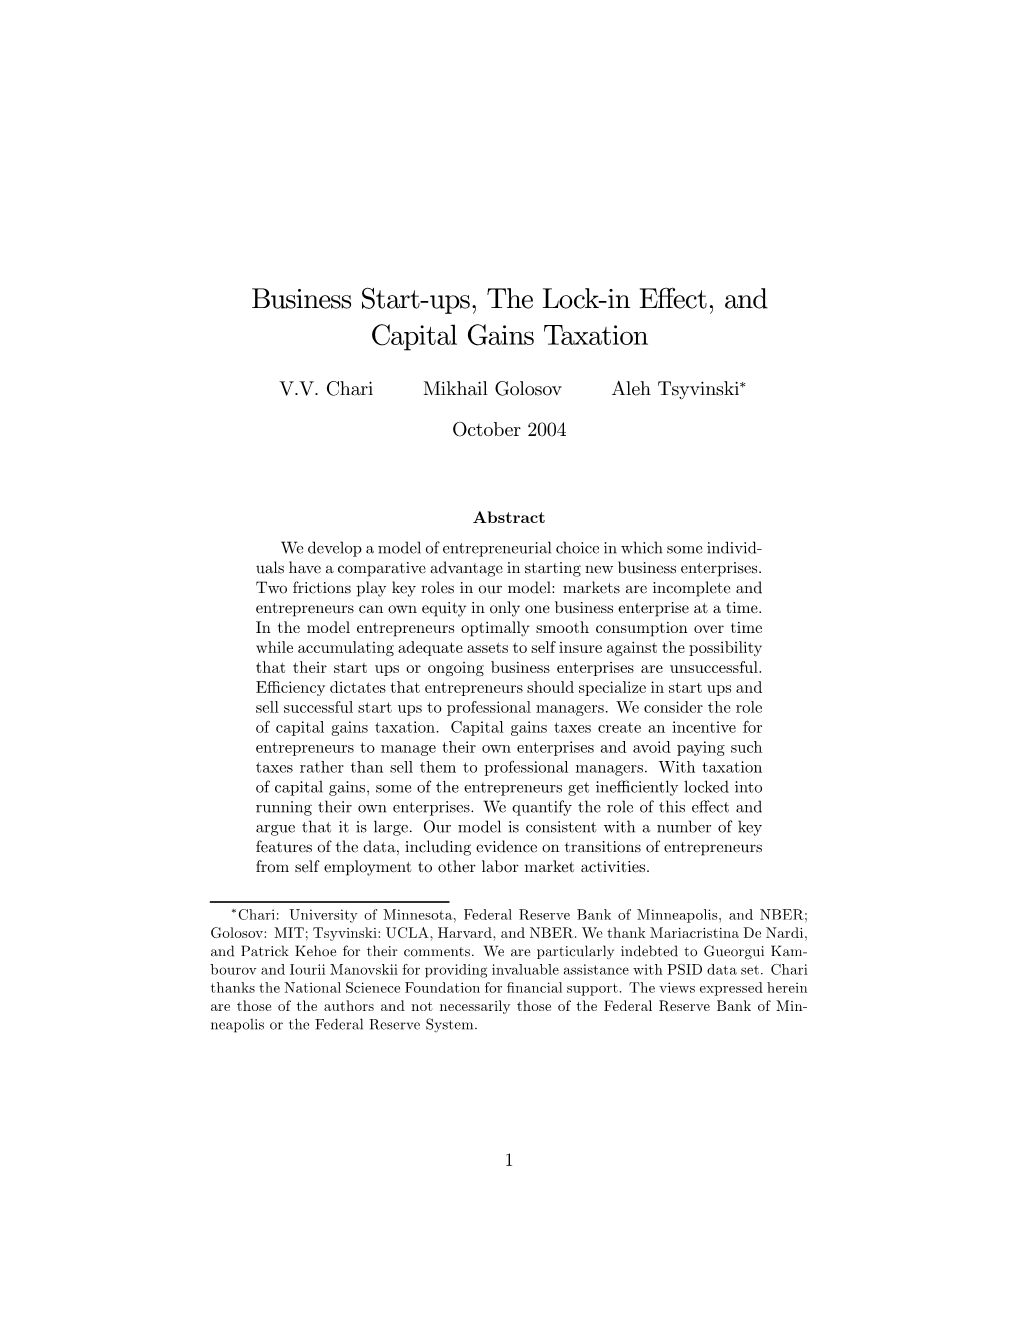 Business Start-Ups, the Lock-In Effect, and Capital Gains Taxation